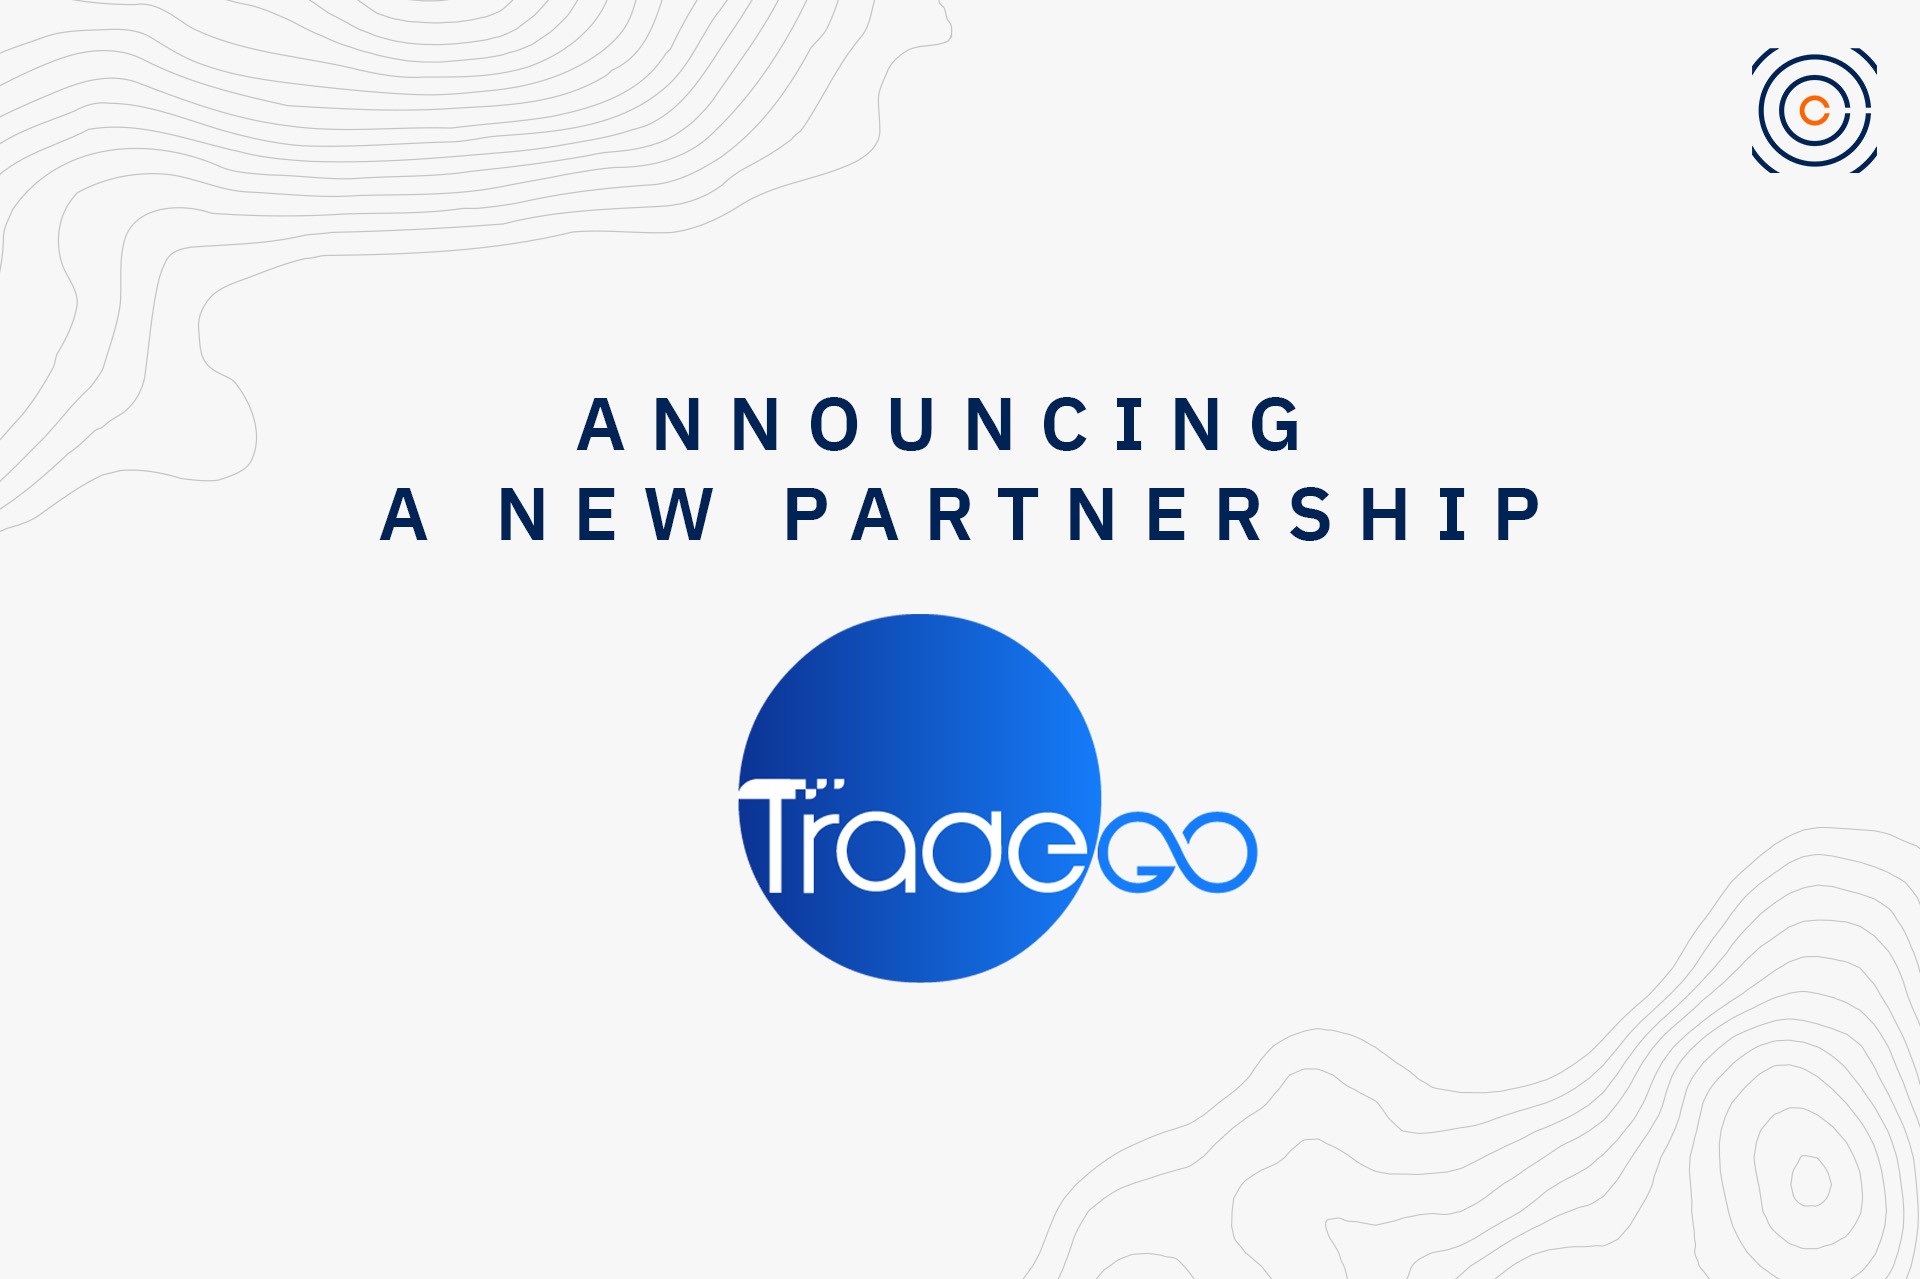 Contour partners with TradeGo to accelerate digital trade finance transformation in China and beyond